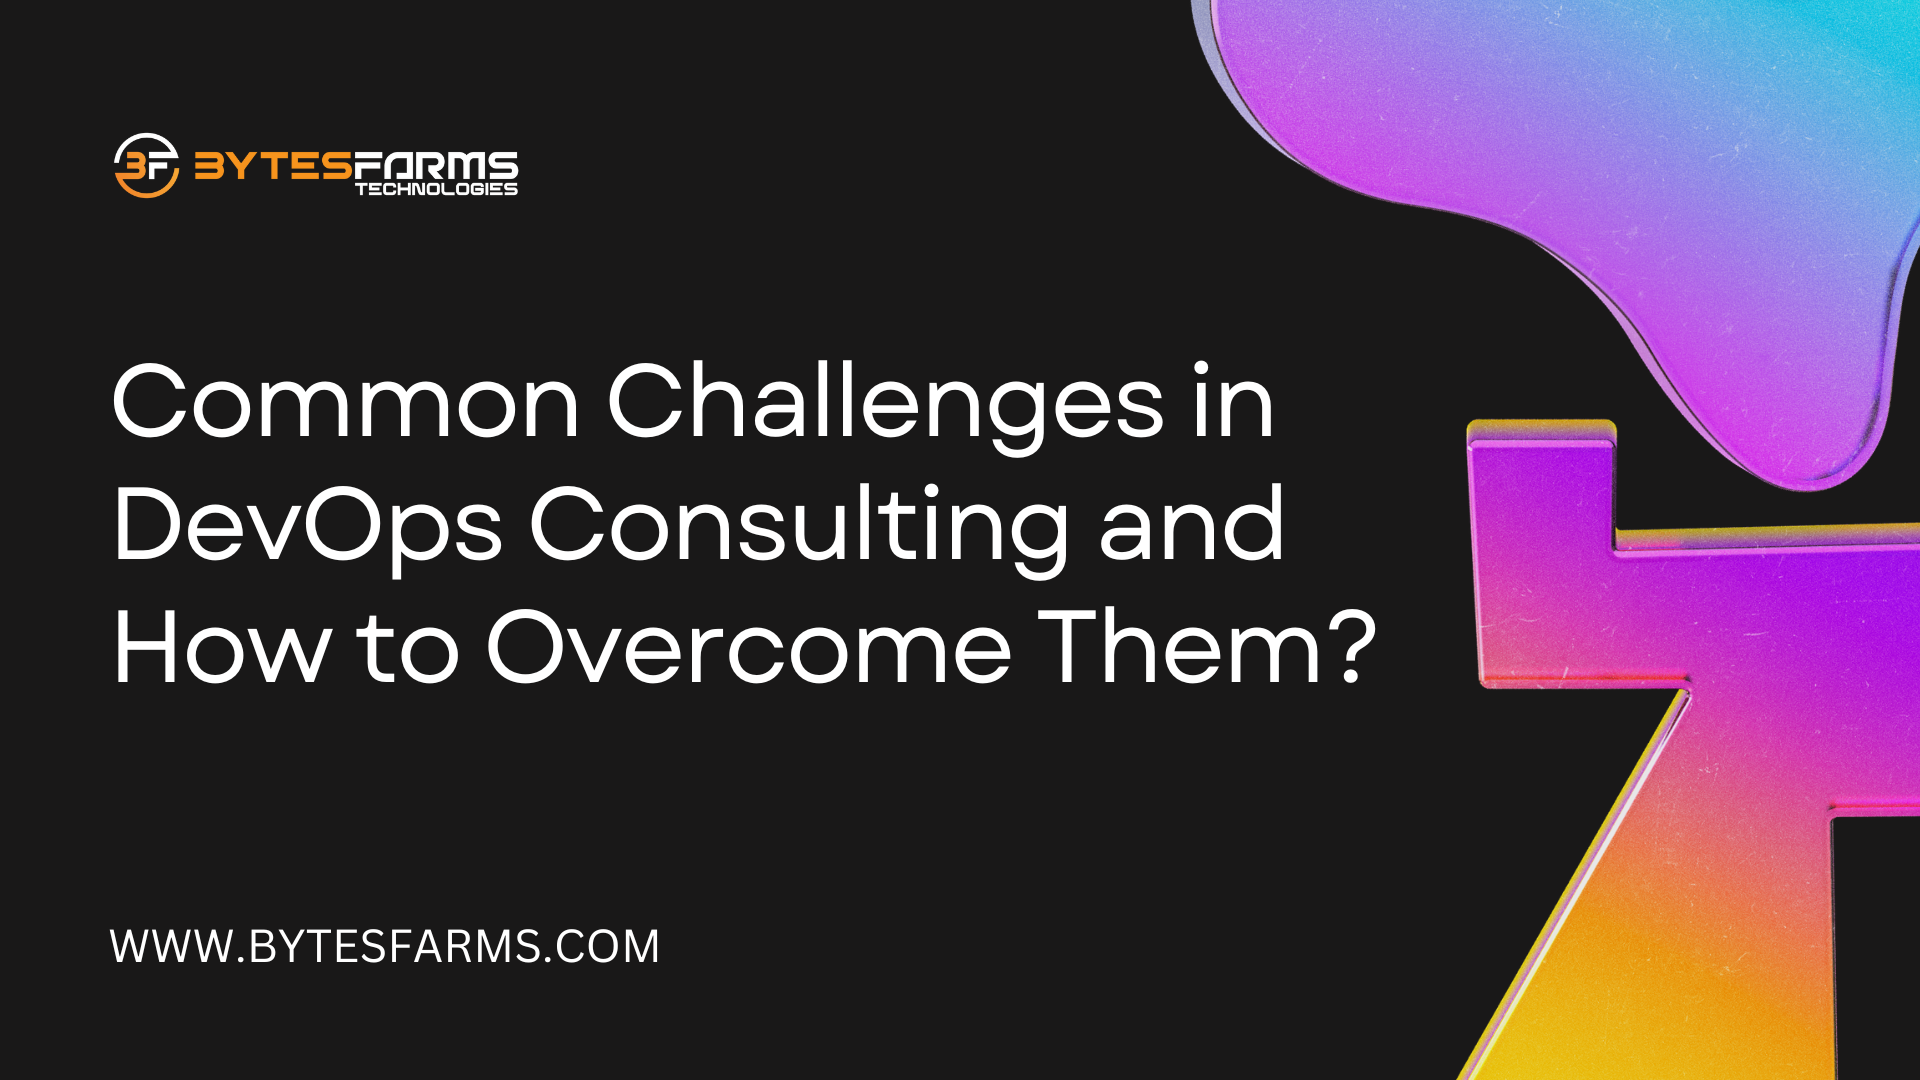 Common Challenges in DevOps Consulting and How to Overcome Them?